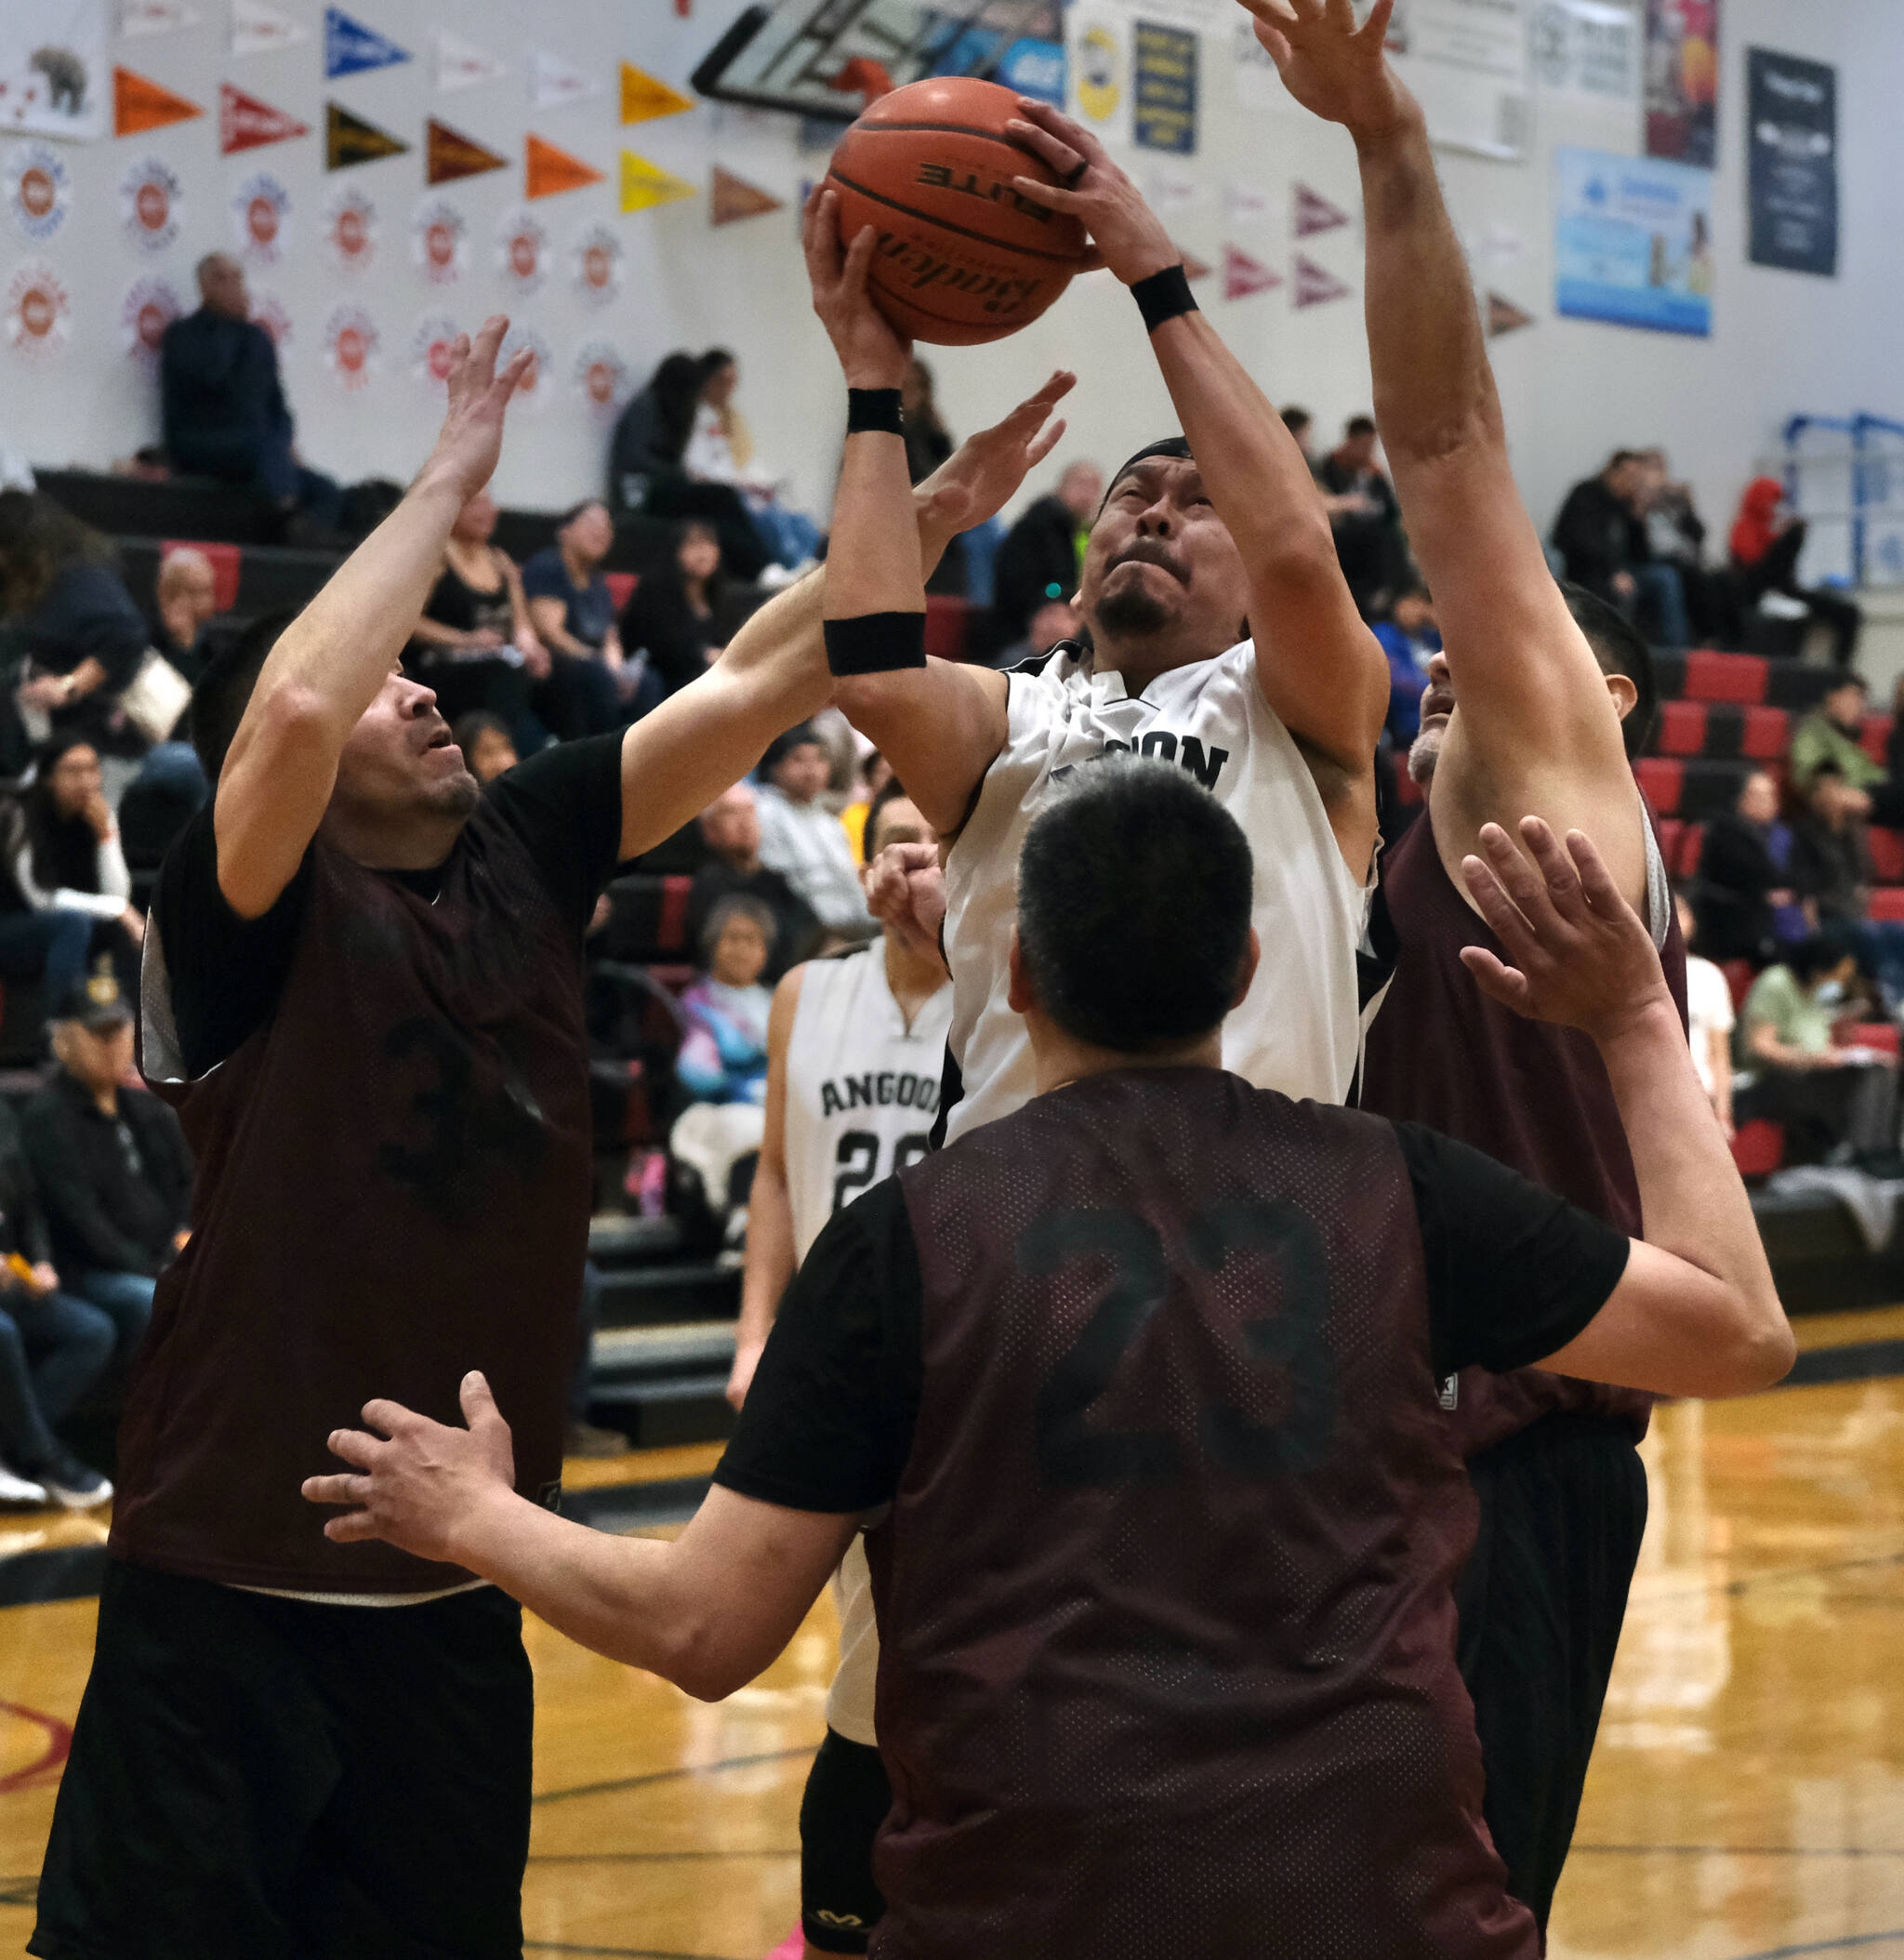 Angoon’s Travis See powers up a shot against Hoonah’s Kamal Lindoff, Albert Hinchman and Michael Mills during the Gold Medal tournament, Wednesday, March 22, at Juneau-Douglas High School: Yadaa.at Kalé. (Klas Stolpe/For the Juneau Empire)